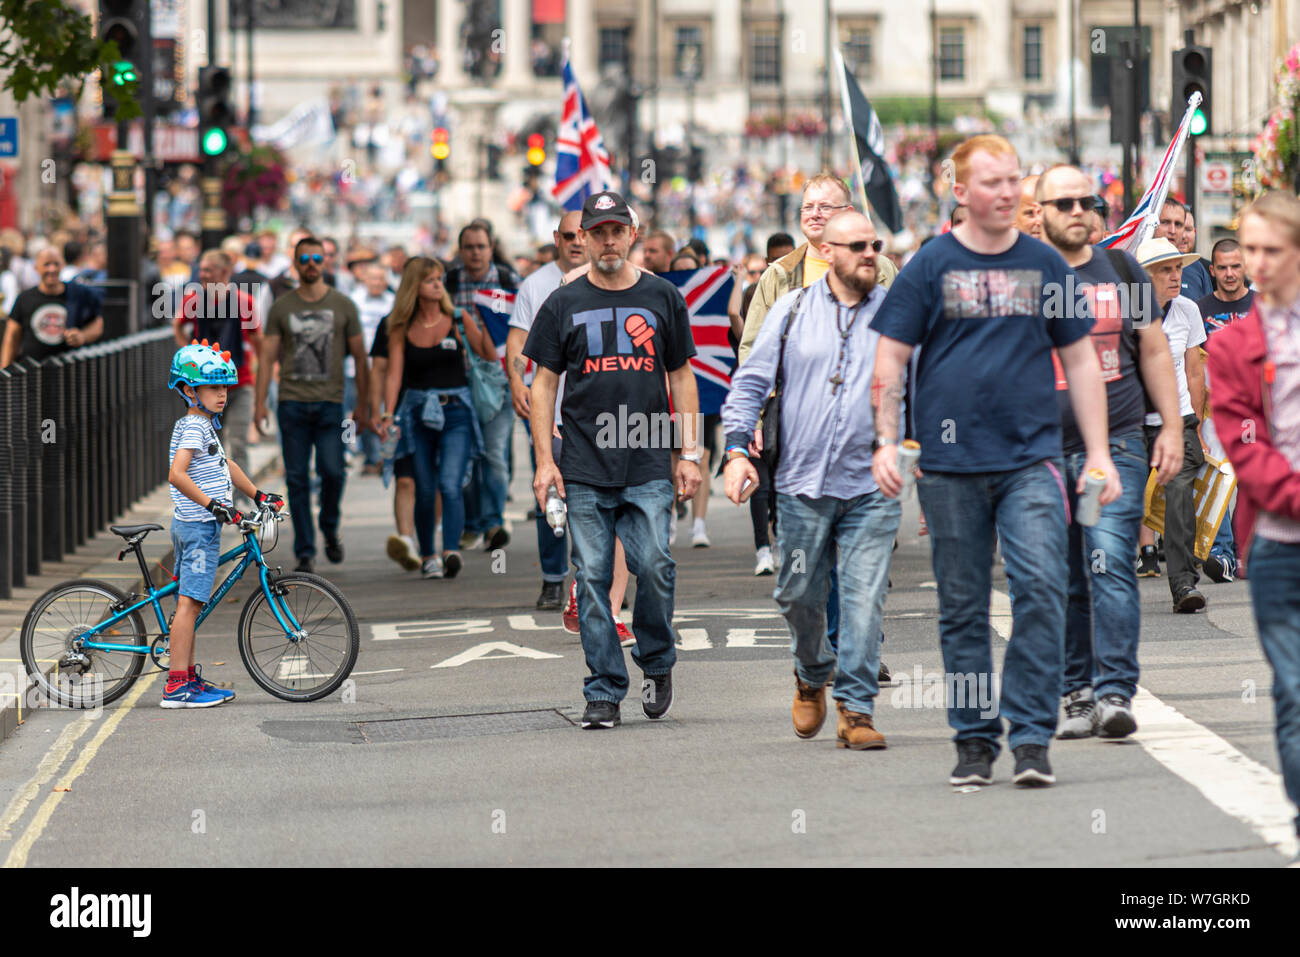 Protesters in Whitehall at Free Tommy Robinson protest rally In London, UK. They blocked the RideLondon Freecycle cycling event. Boy cyclist bemused Stock Photo